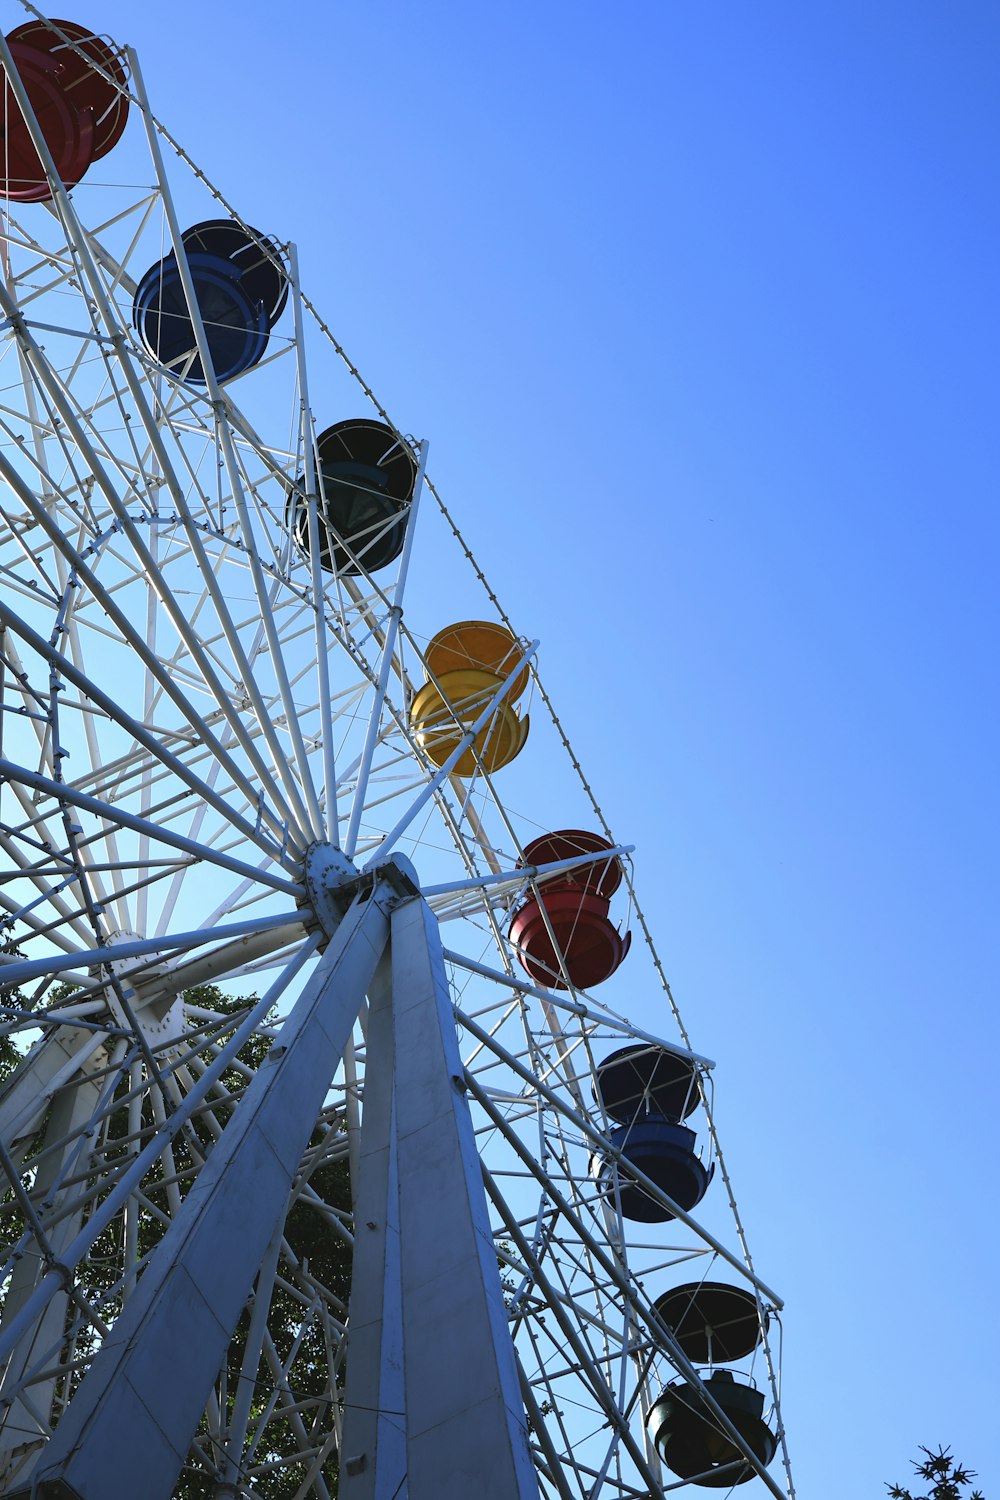 a ferris wheel with several colorful balls on it